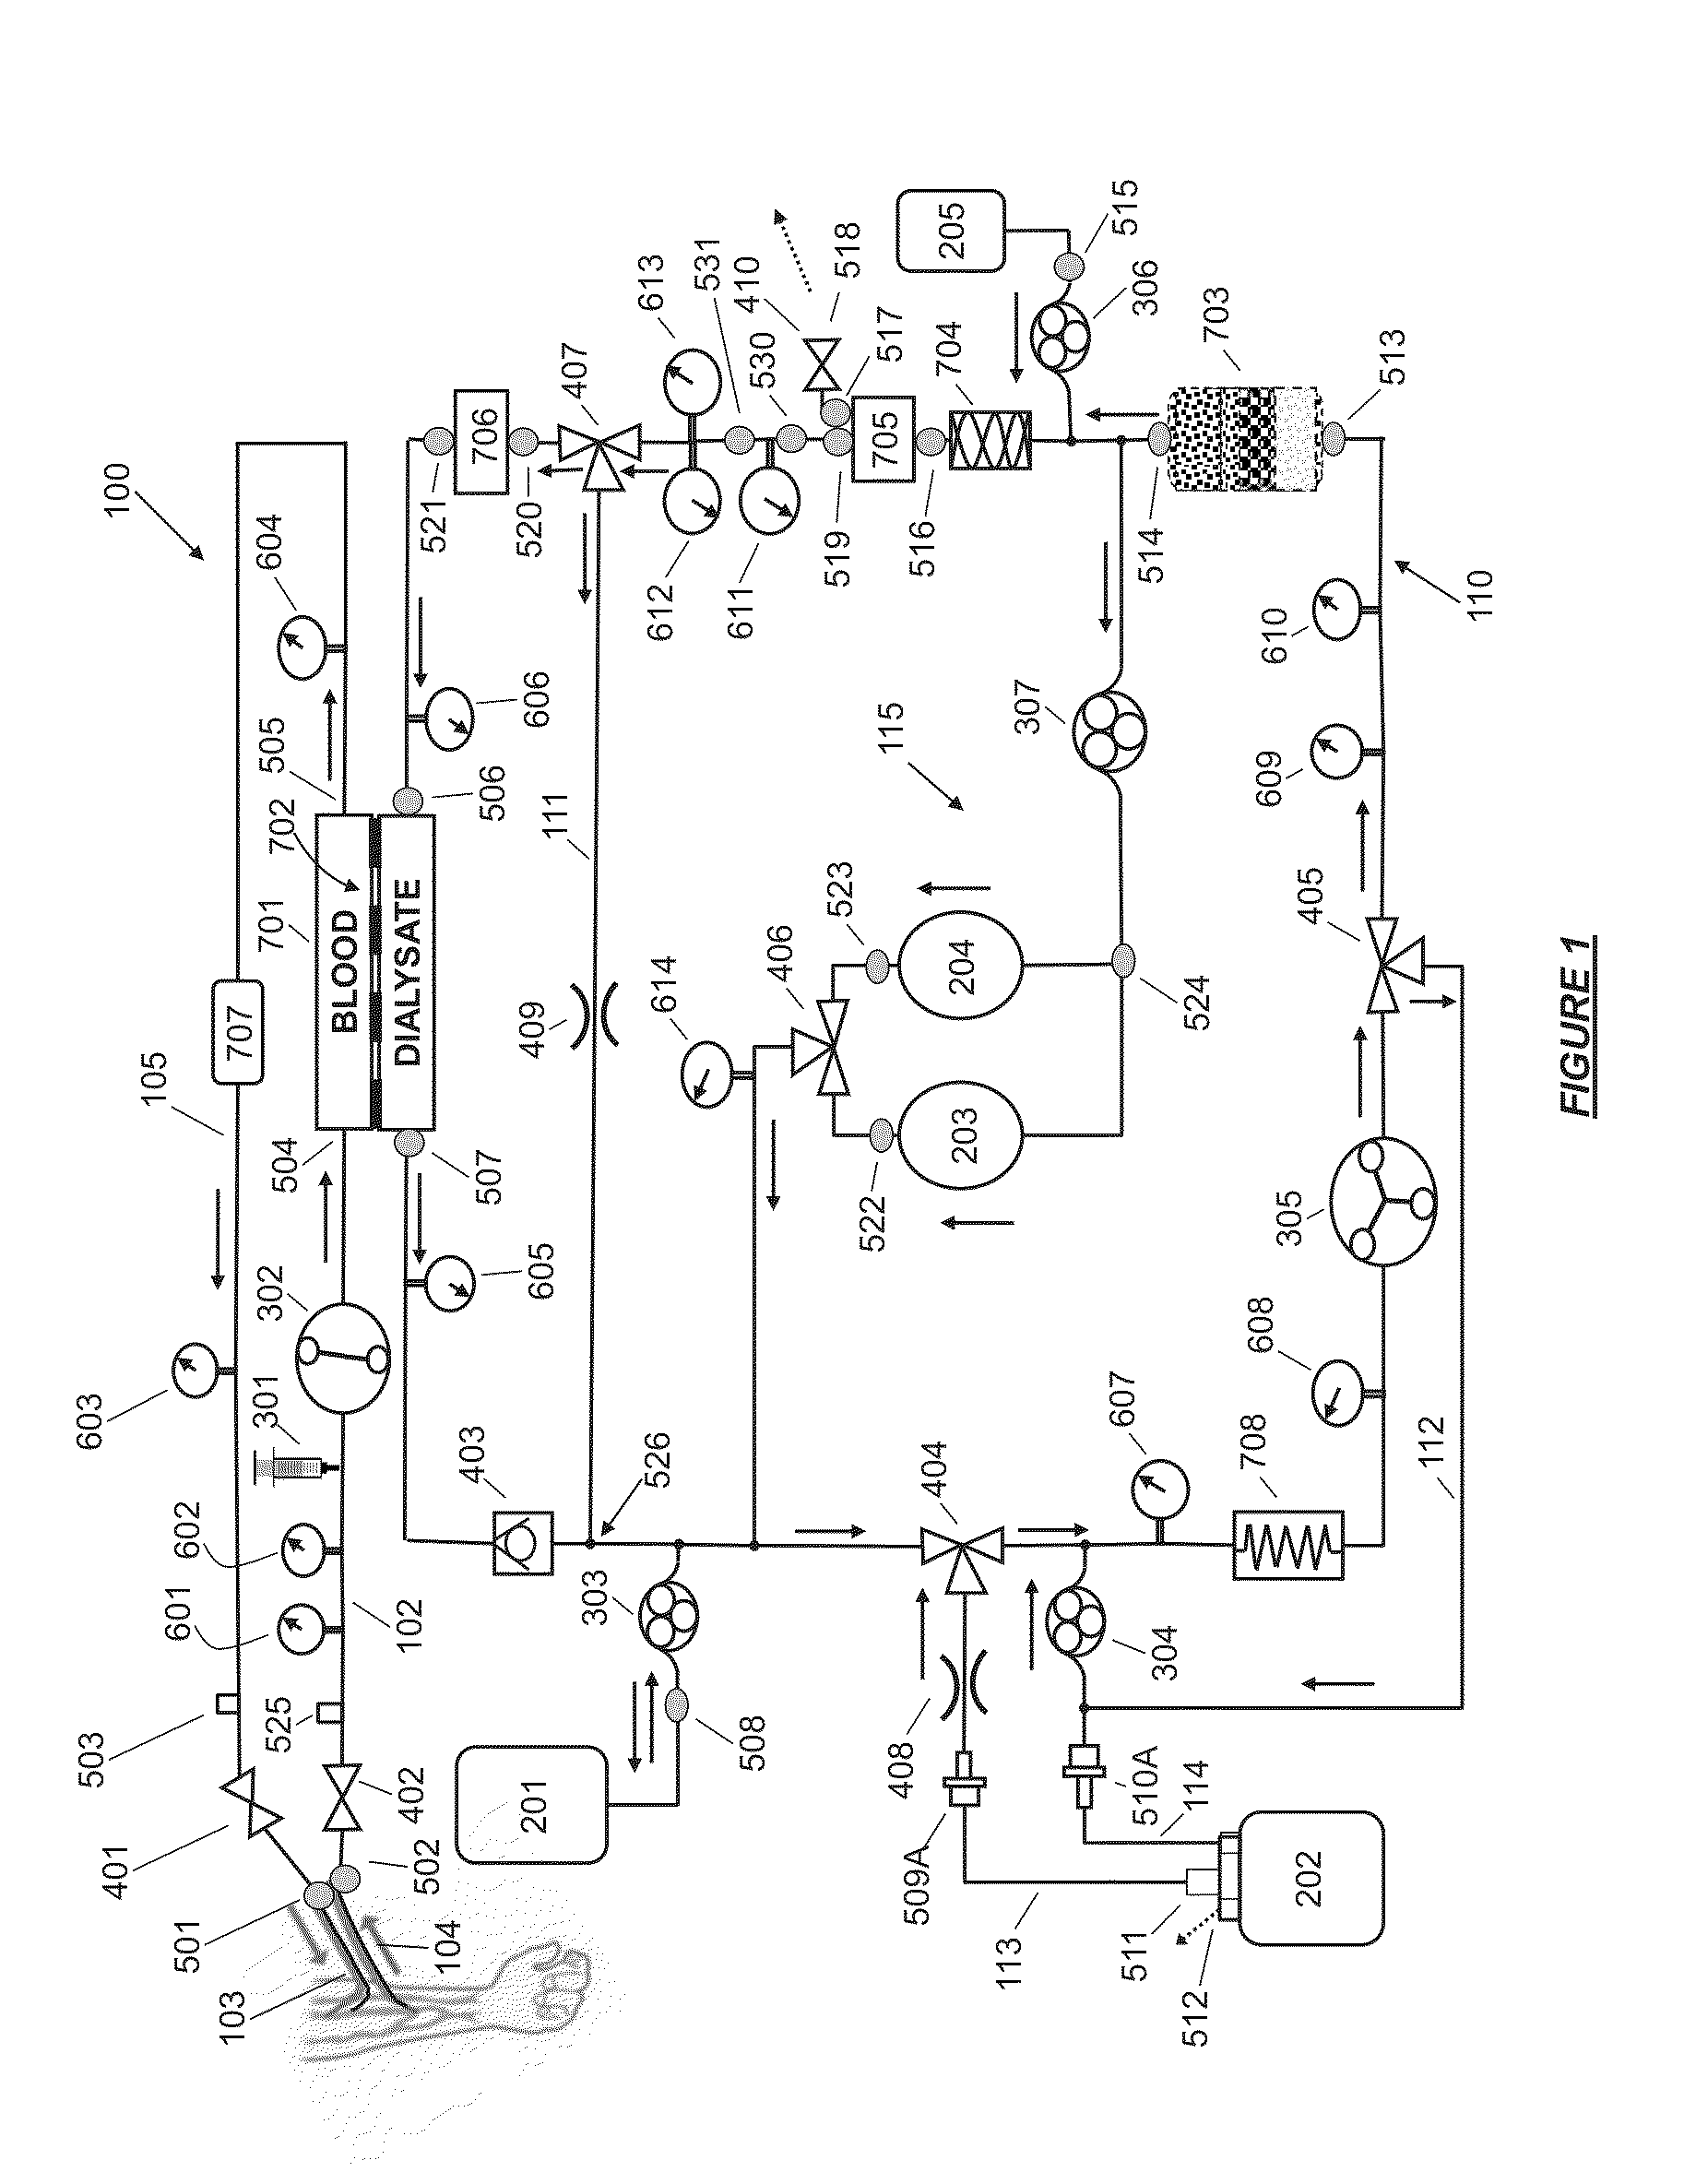 Systems and methods for multifunctional volumetric fluid control